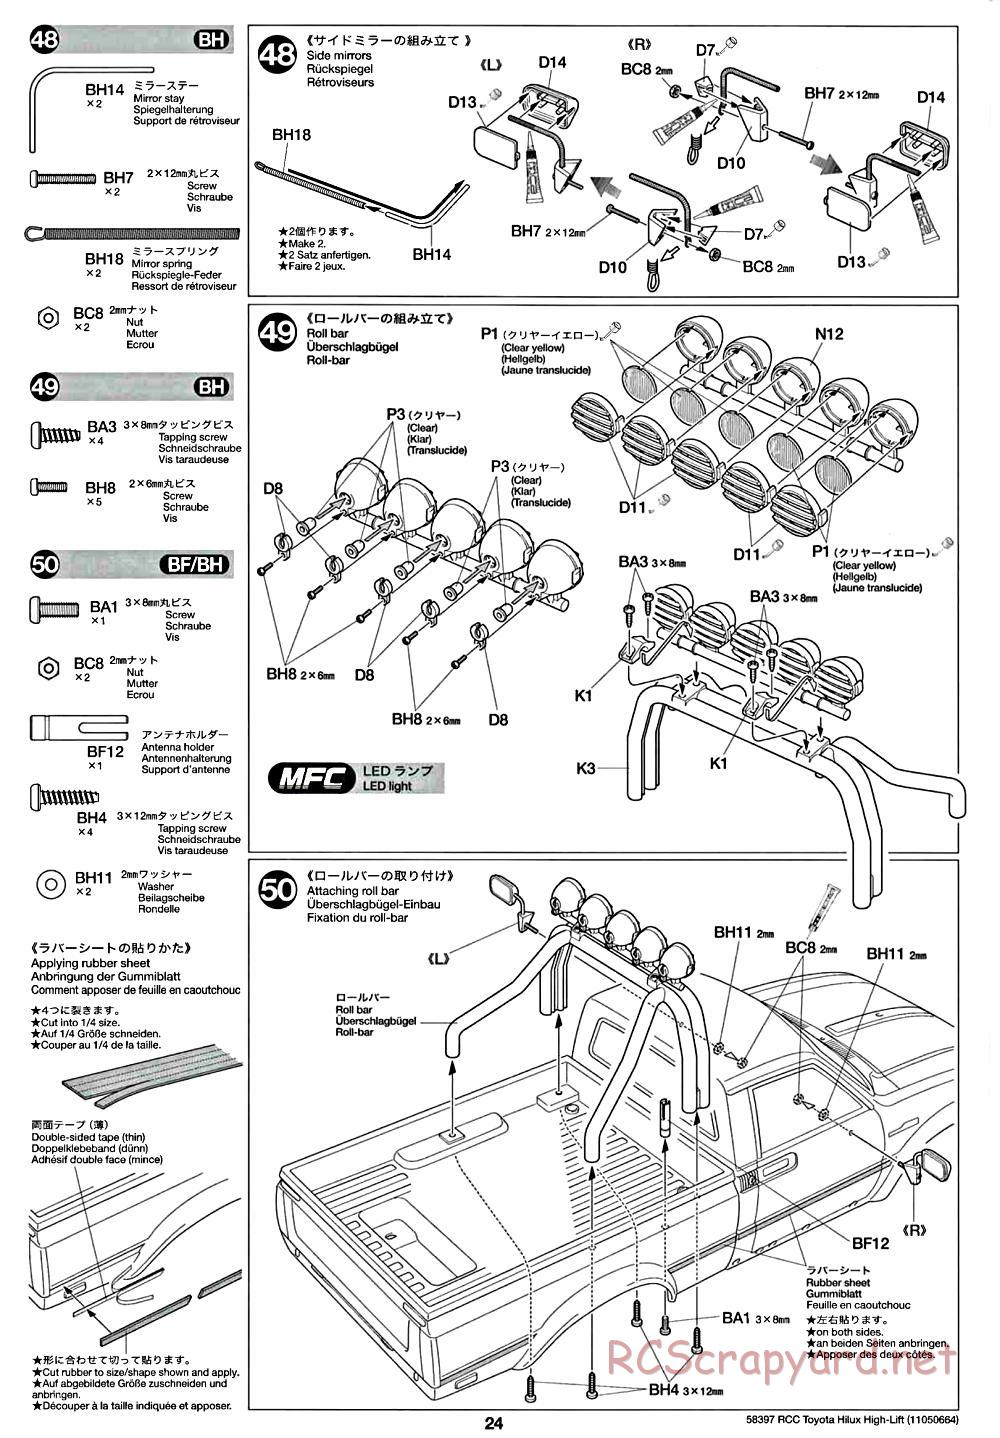 Tamiya - Toyota Hilux High-Lift Chassis - Manual - Page 24